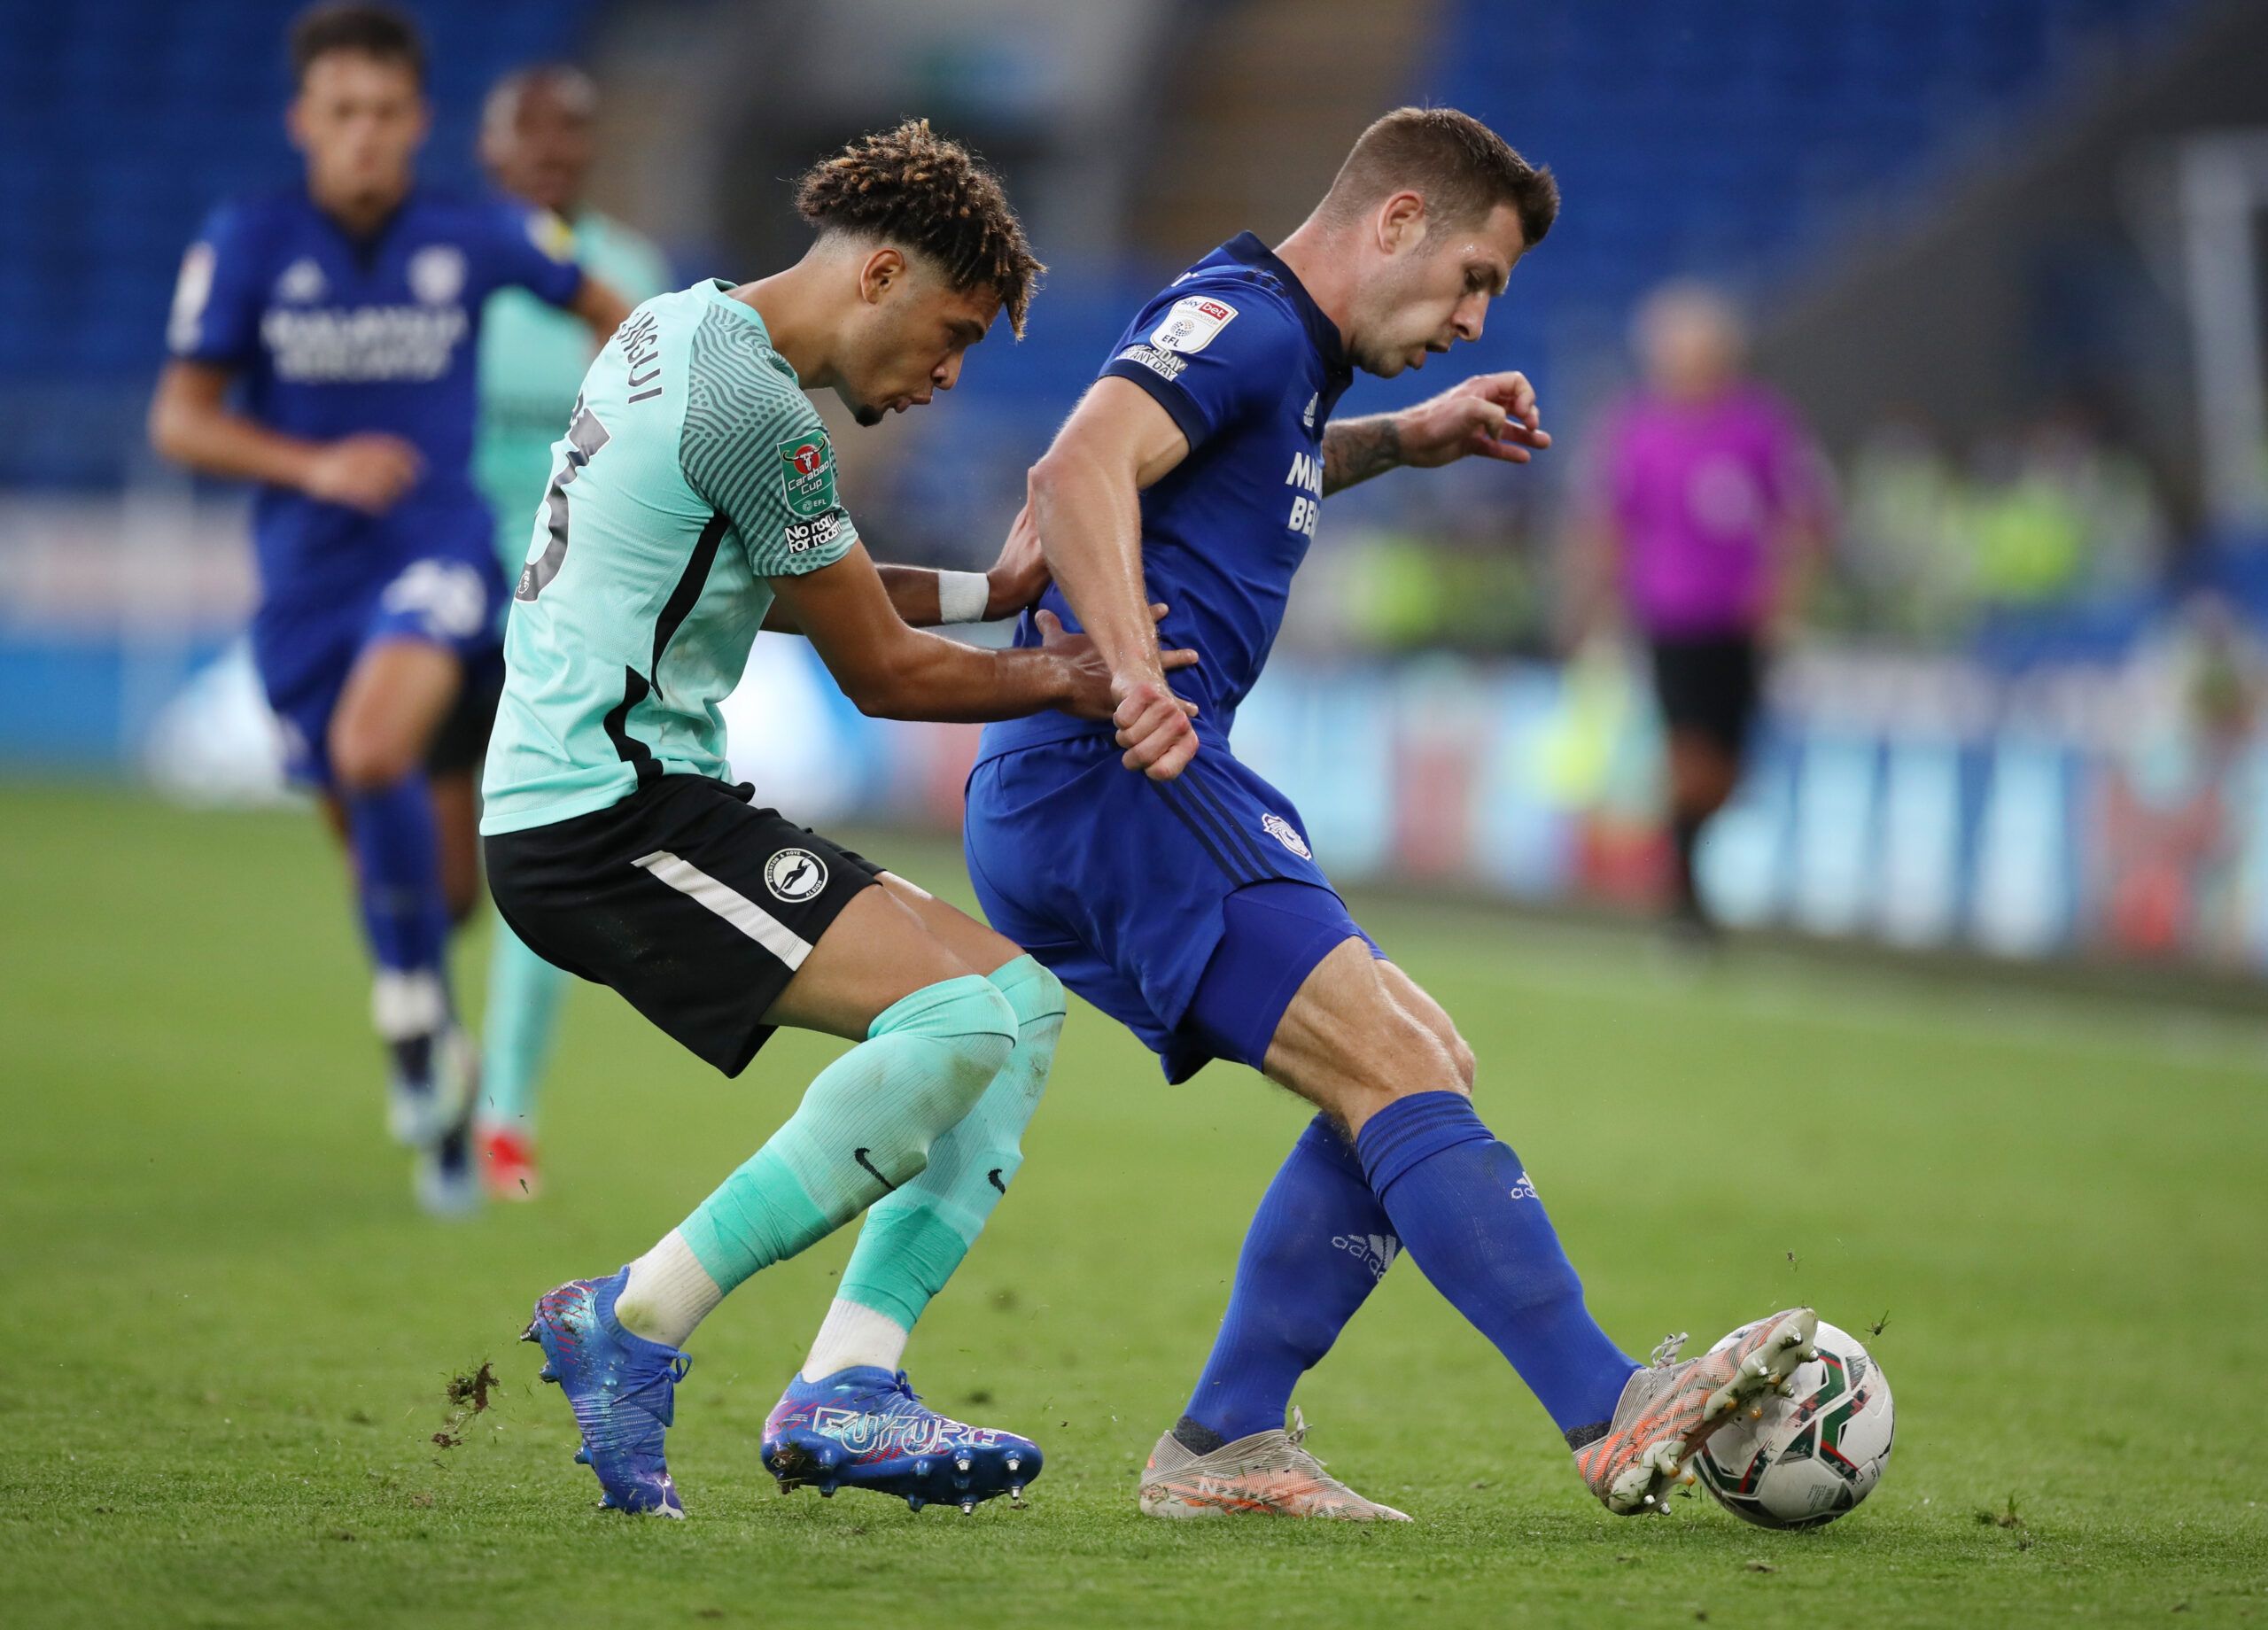 Soccer - England - Carabao Cup Second Round - Cardiff City v Brighton &amp; Hove Albion - Cardiff City Stadium, Cardiff, Britain - August 24, 2021 Cardiff City's James Collins in action with Brighton &amp; Hove Albion's Antef Tsoungui Action Images via Reuters/Peter Cziborra